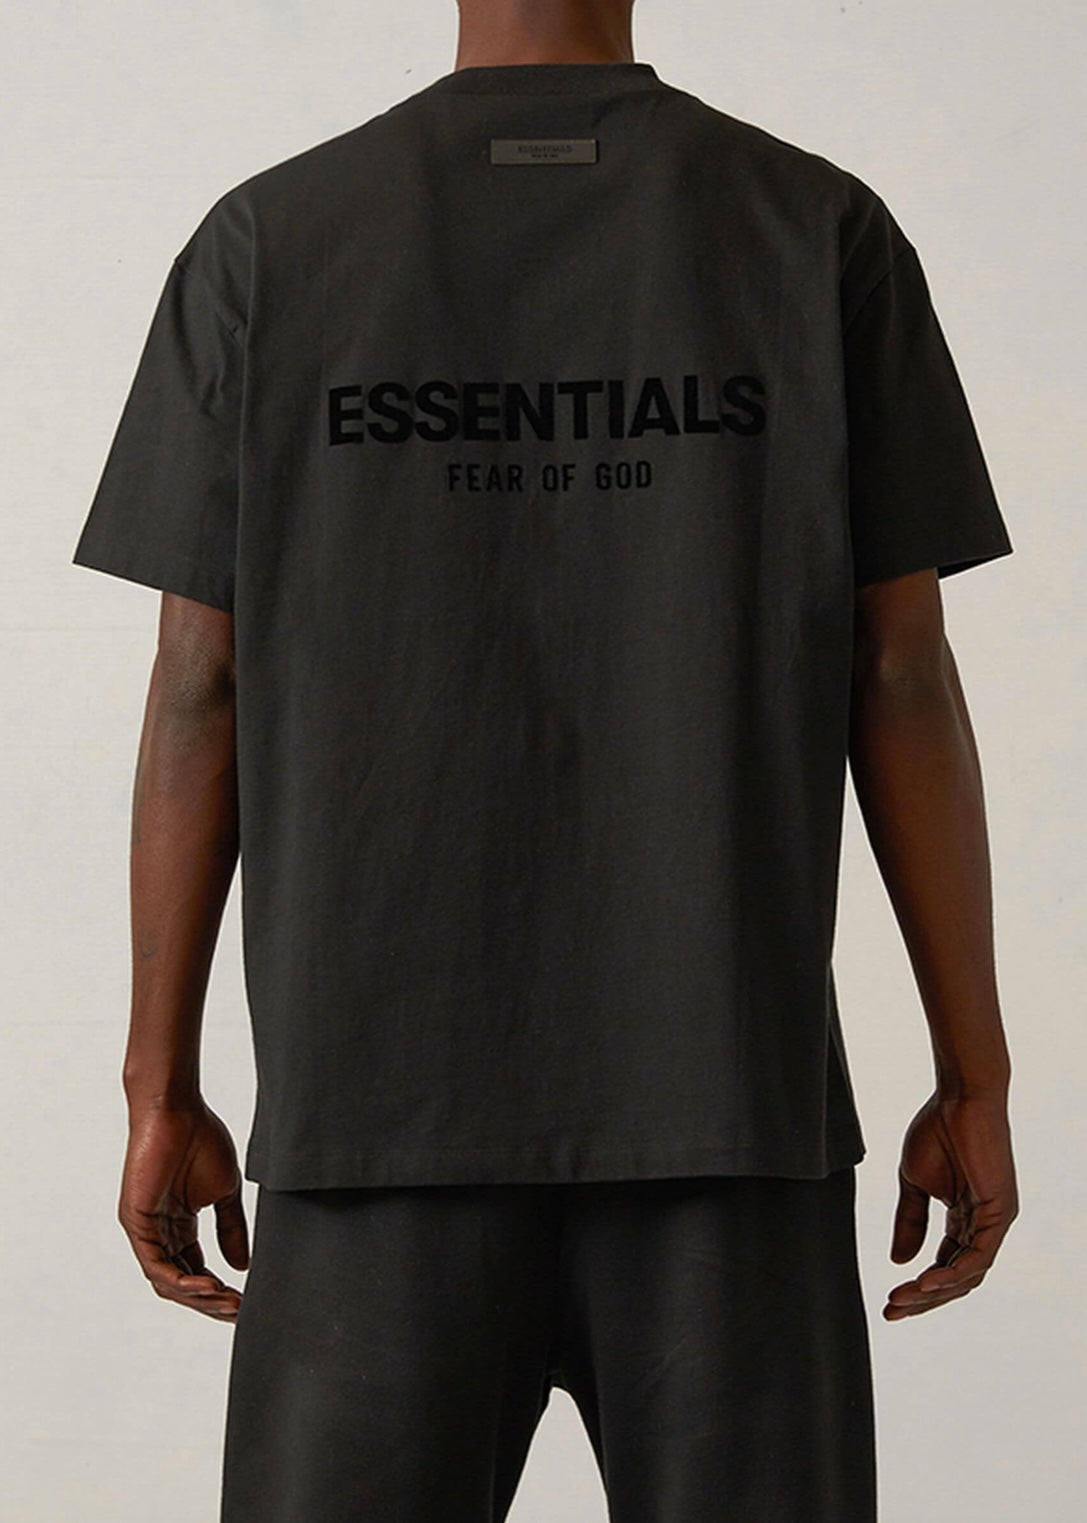 SS22 Essentials Fear Of God Stretch Limo T-Shirt – Youthgenes Market